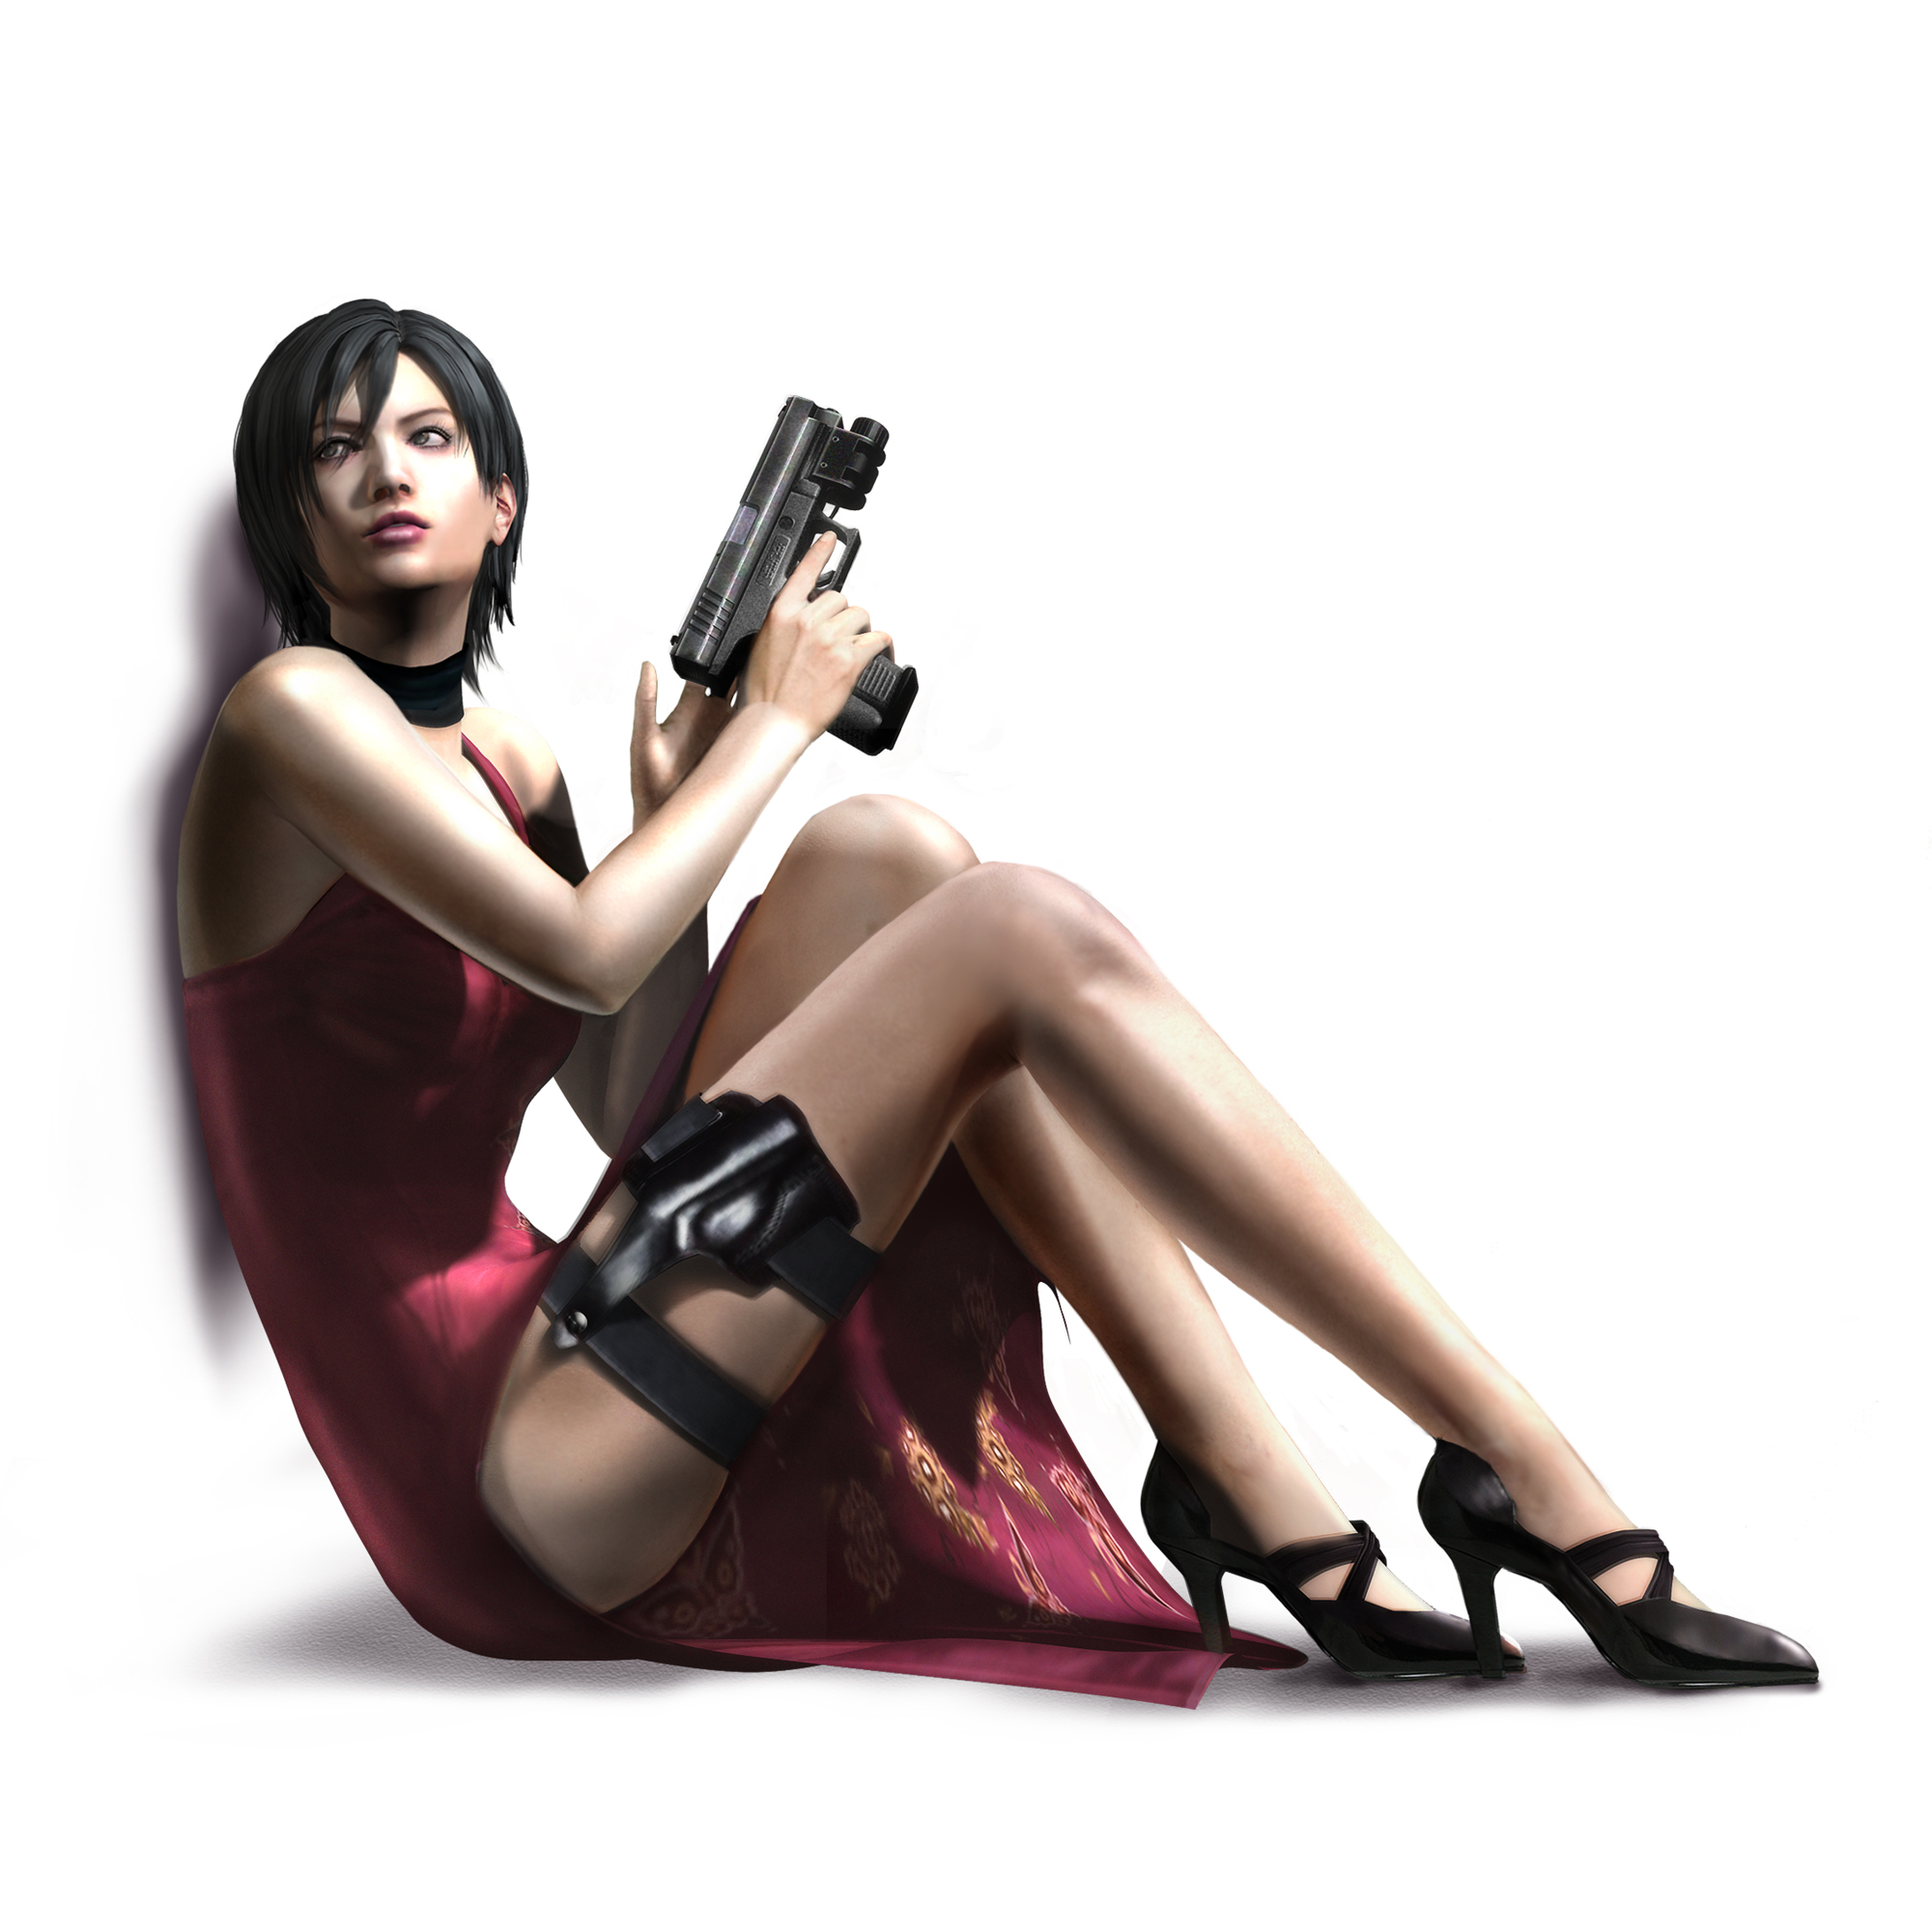 Top 5 outfits resident evil’s ada wong has ever worn